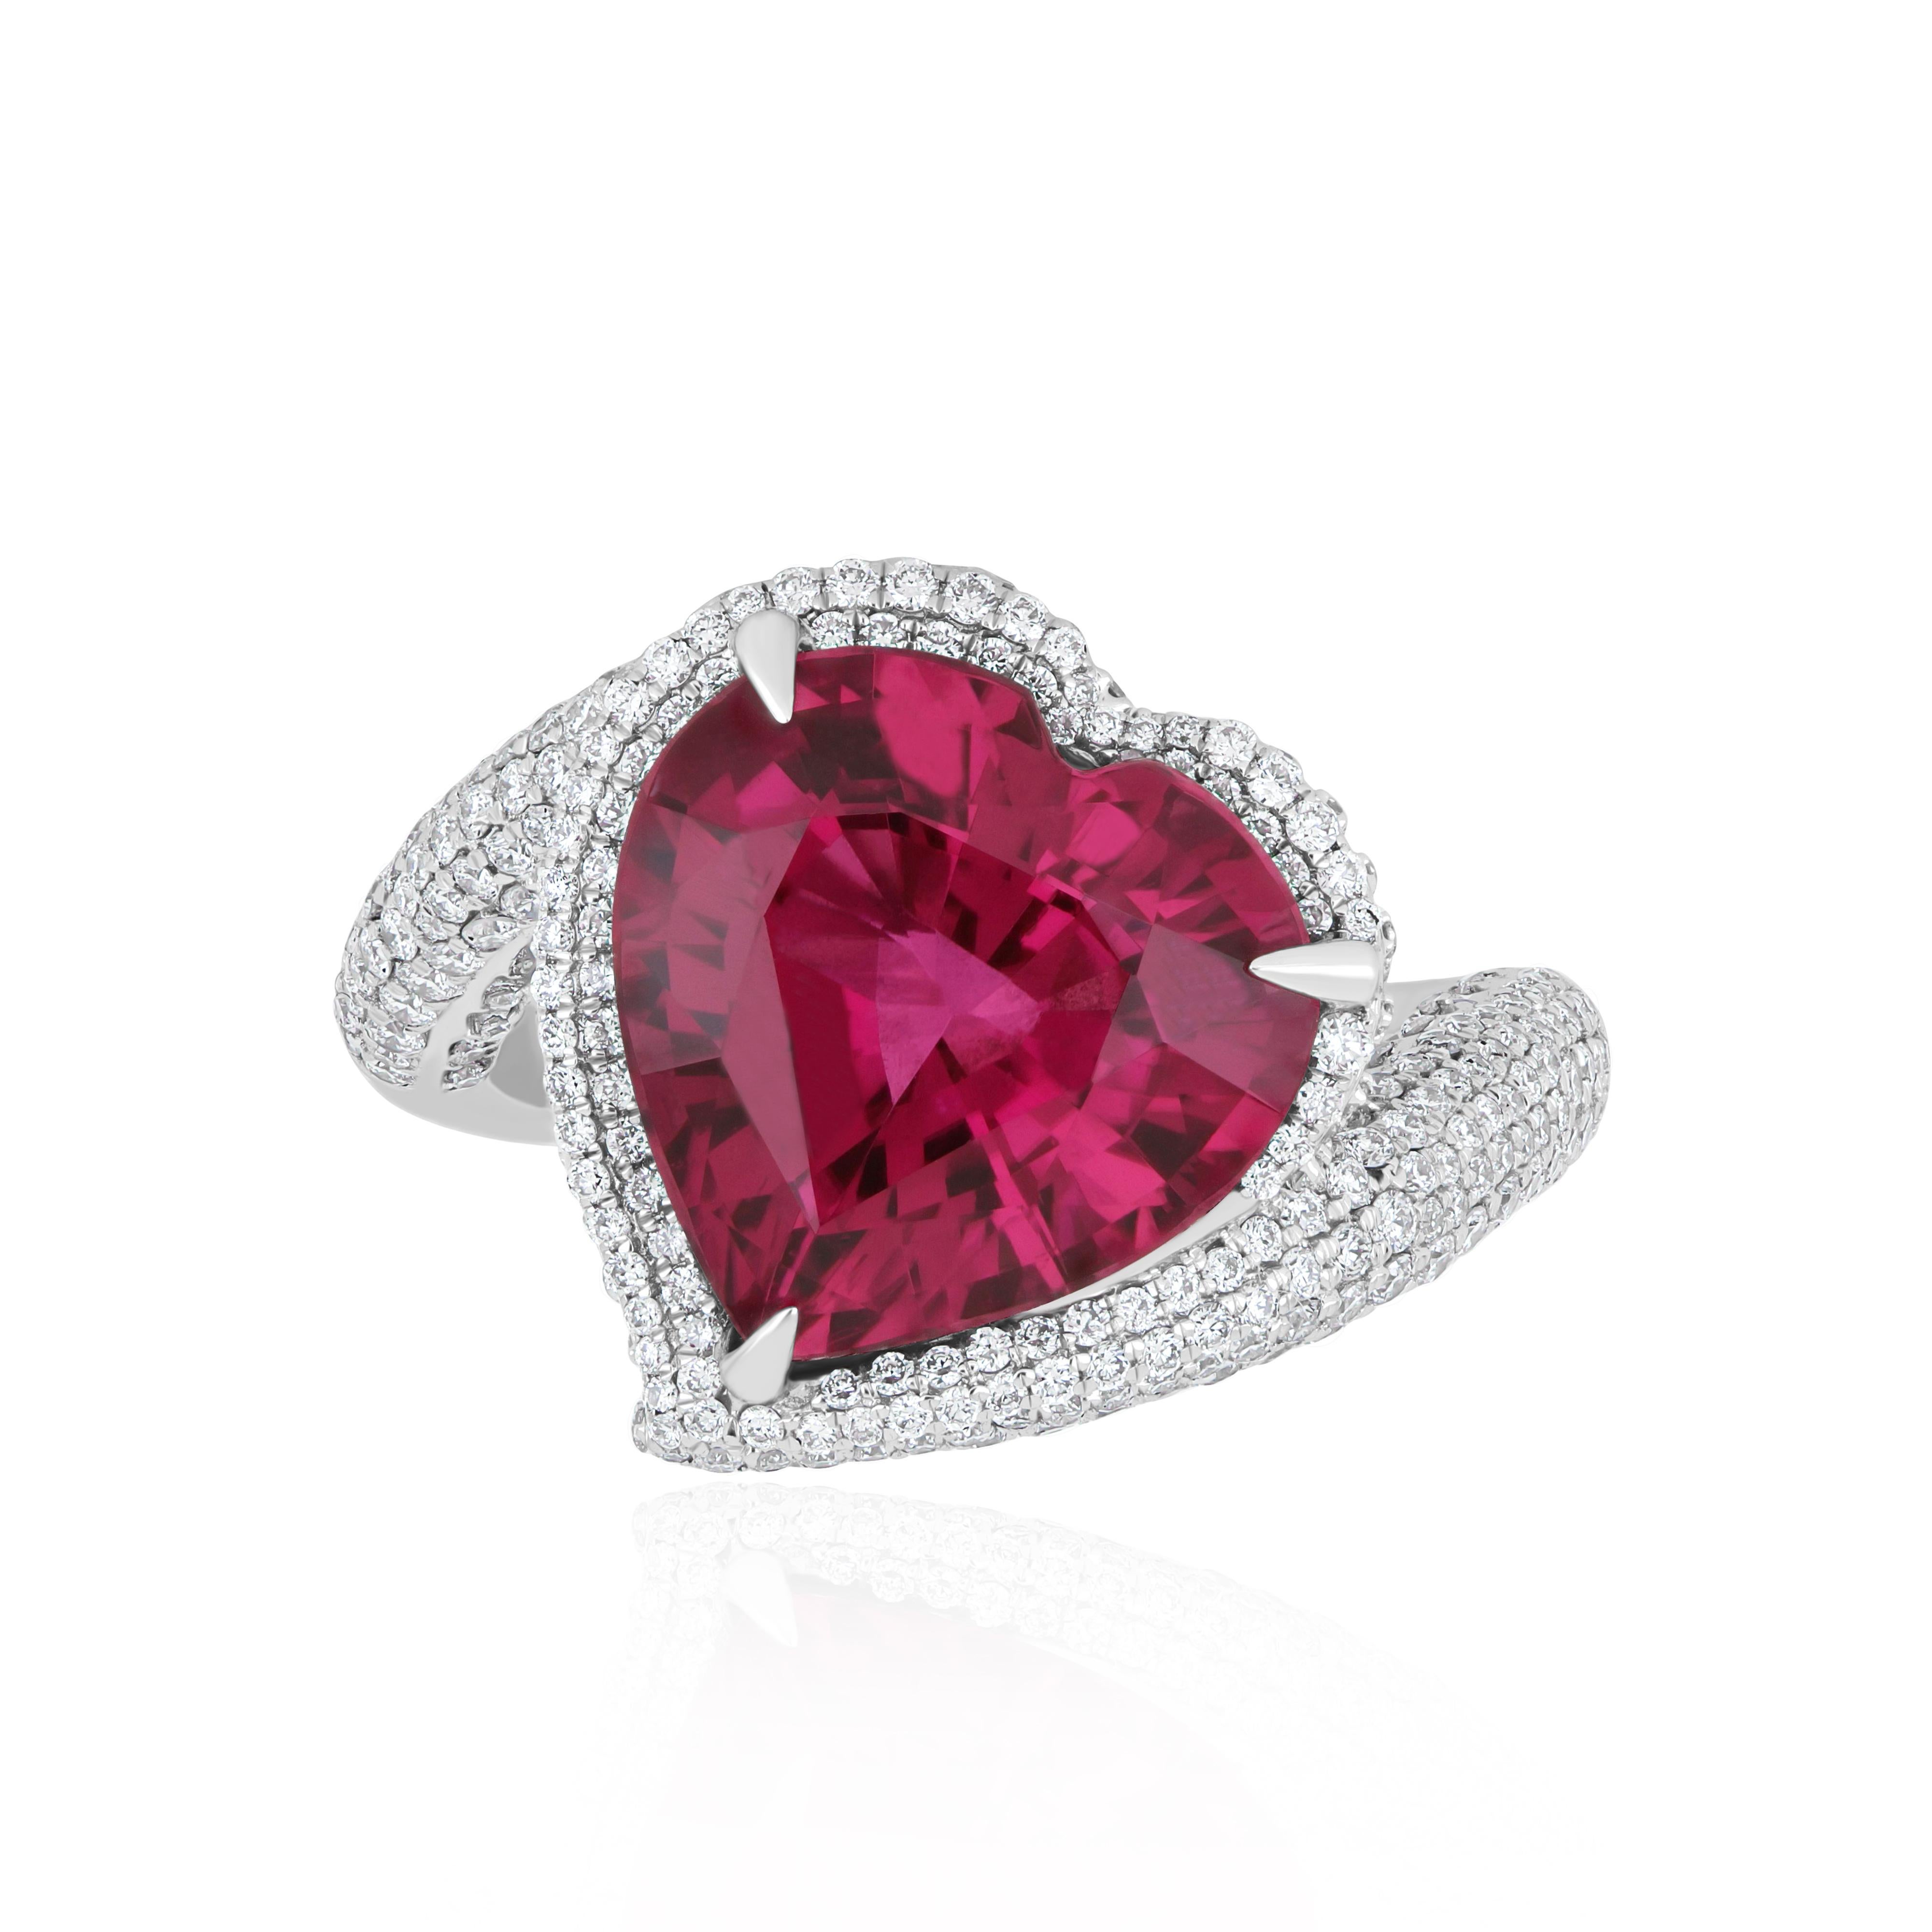 6.8 Carats Rubellite and Diamond Studded Ring in 18K White Gold Ring For Sale 1